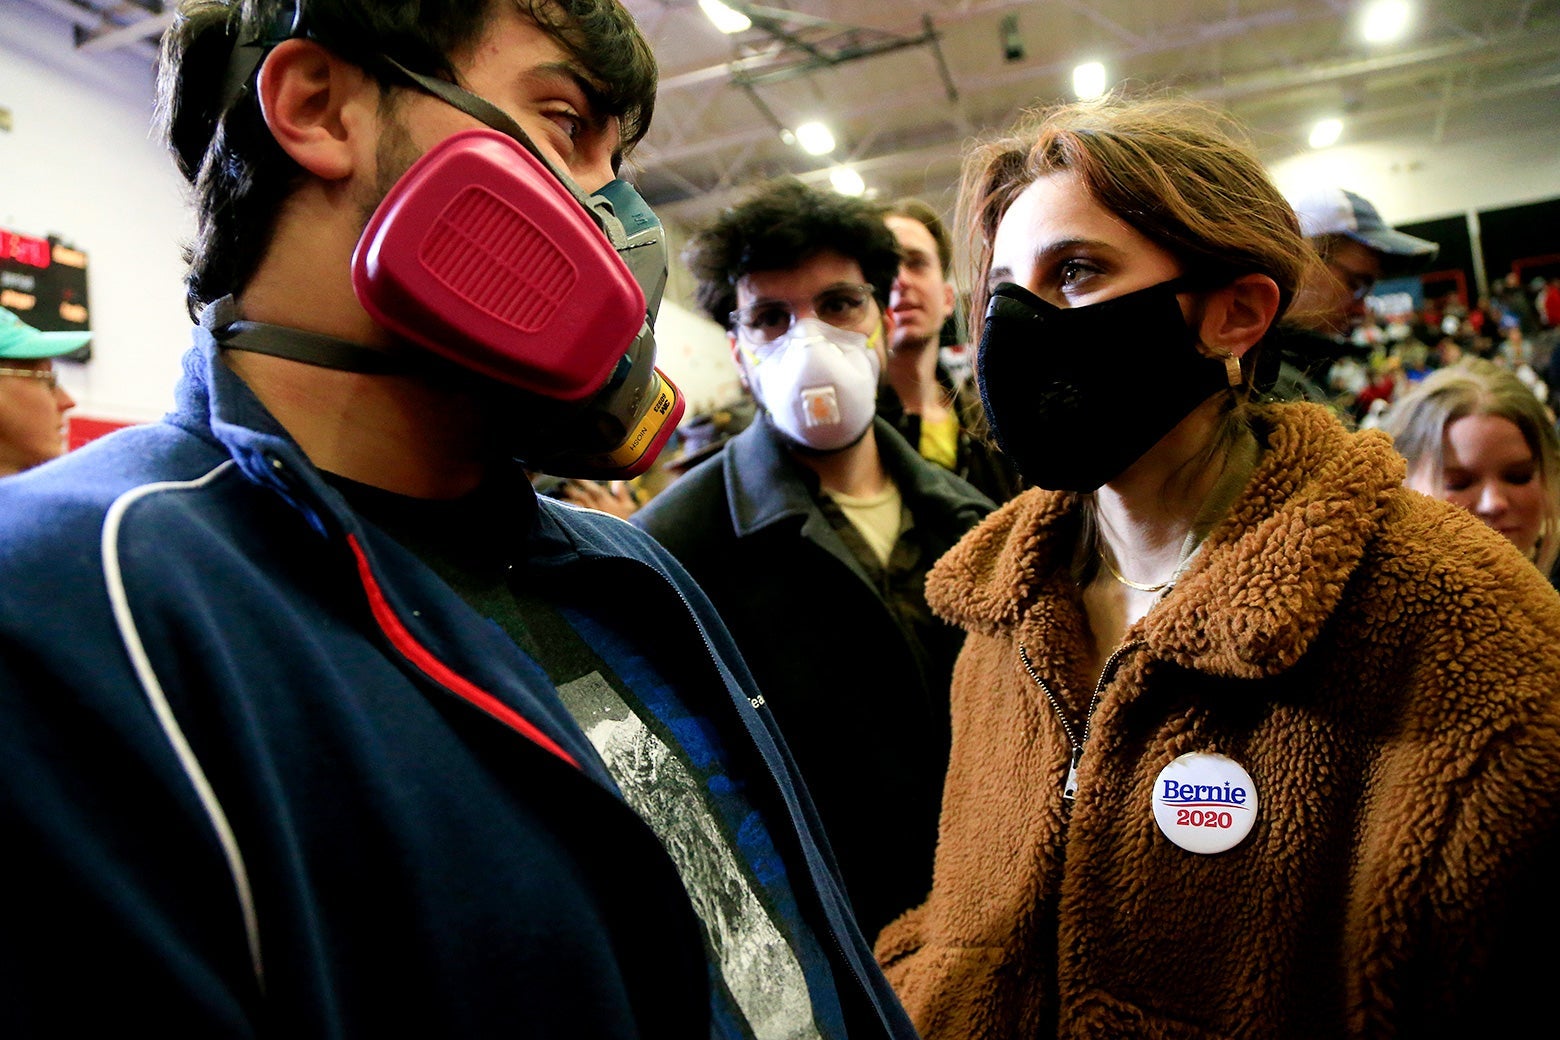 Three people wearing masks while standing in a crowd inside.